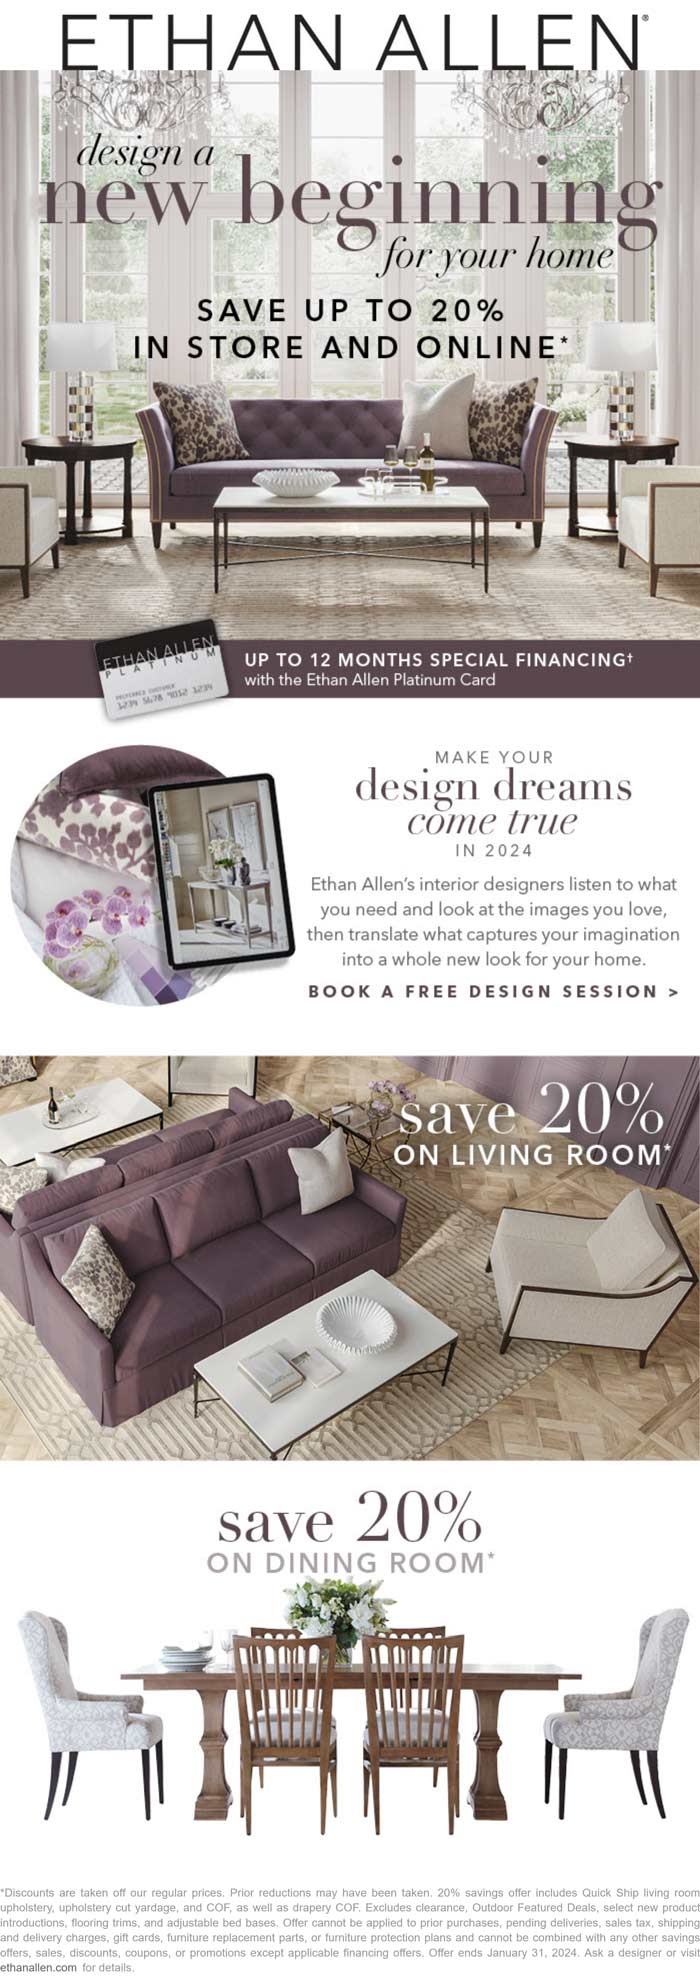 Ethan Allen stores Coupon  20% off furniture and upholstery at Ethan Allen #ethanallen 